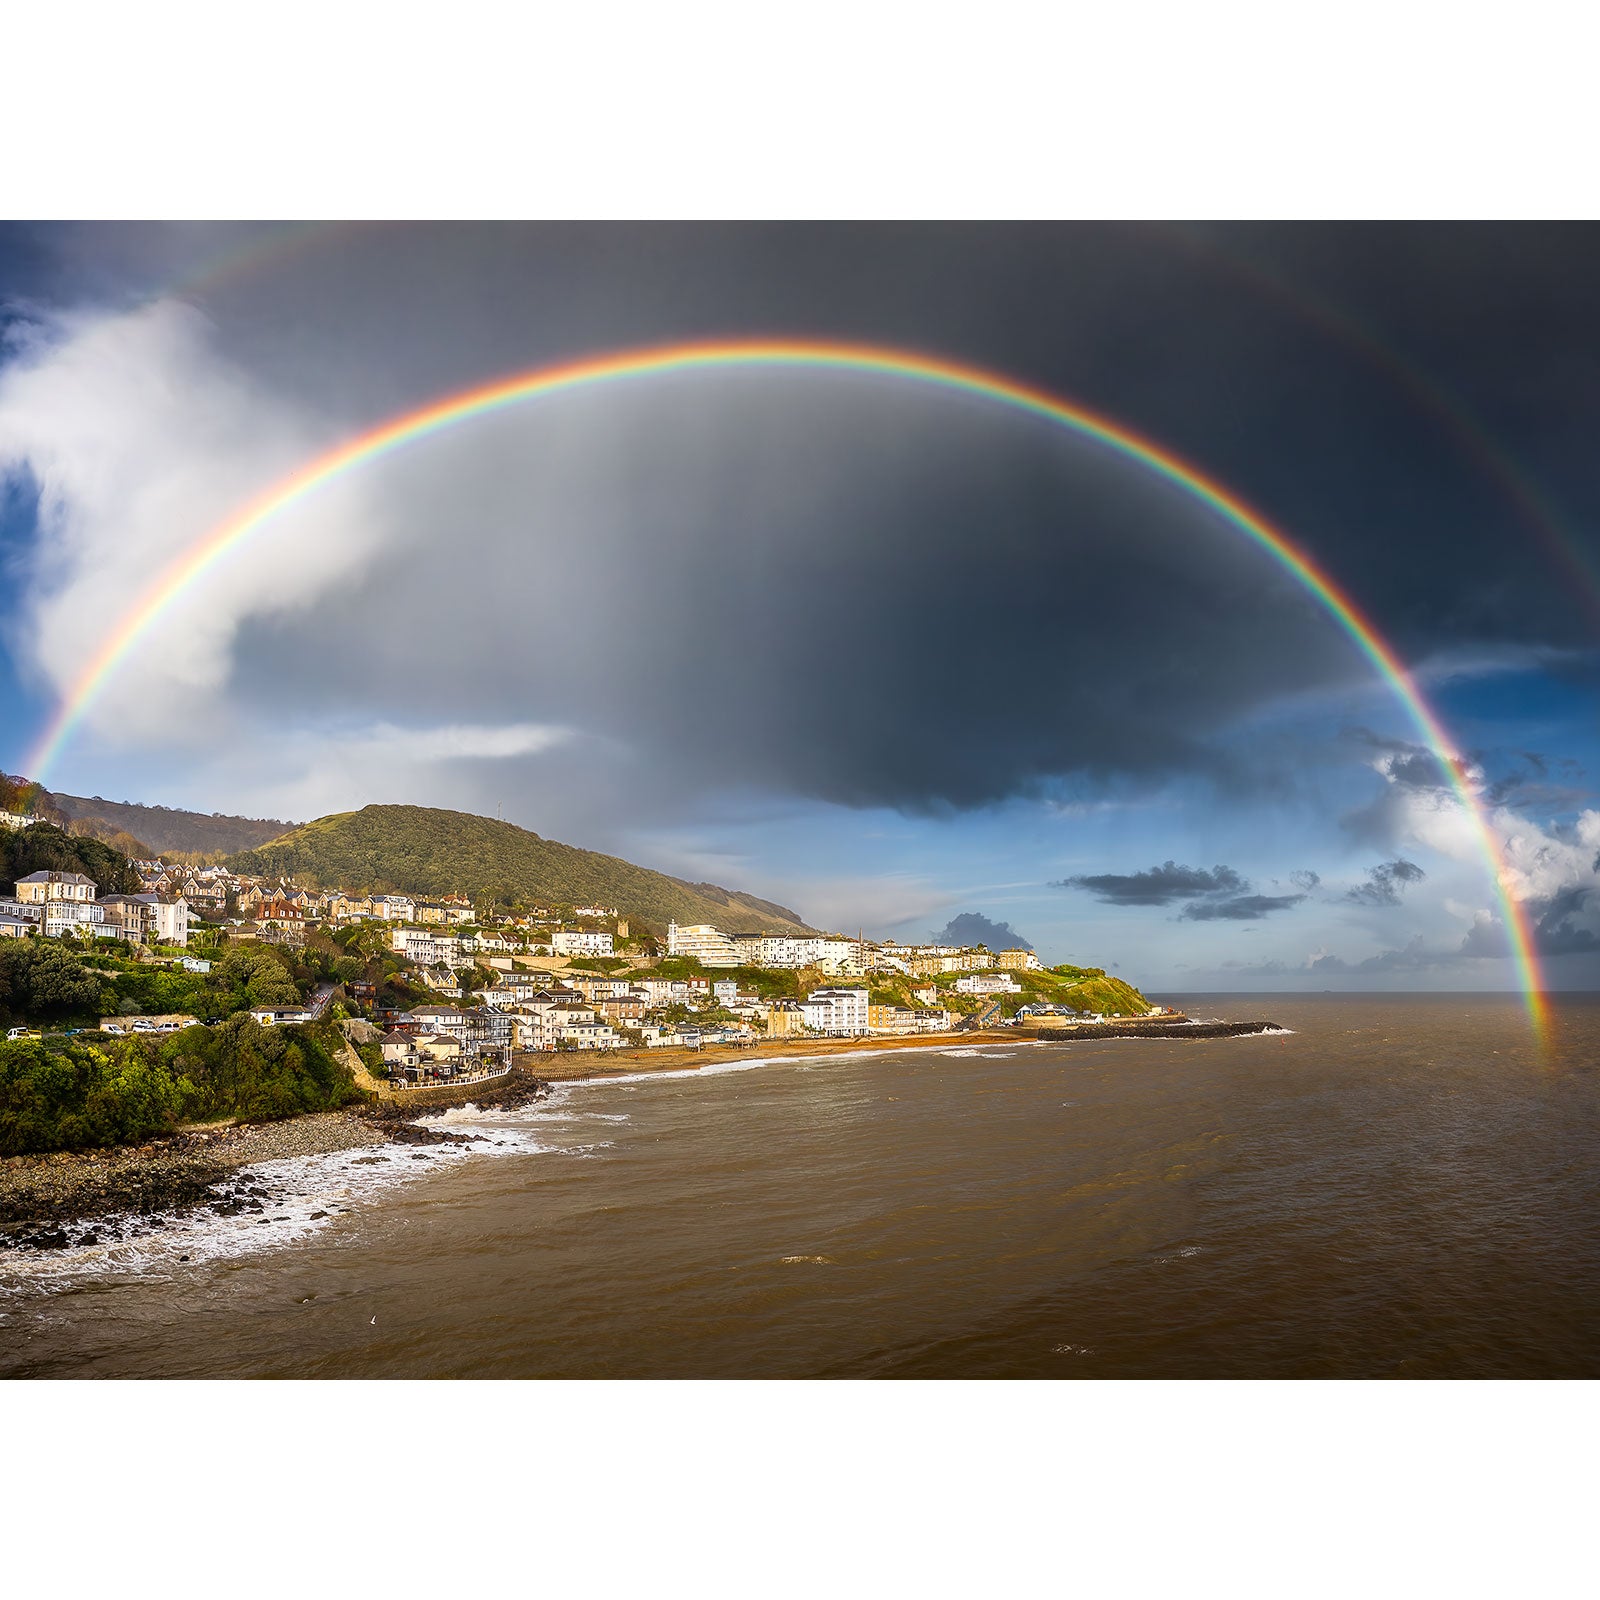 A full rainbow arcs over a coastal town with sunlit buildings against a backdrop of dark storm clouds on the Isle of Wight in the "Rainbow over Ventnor" photograph by Available Light Photography.